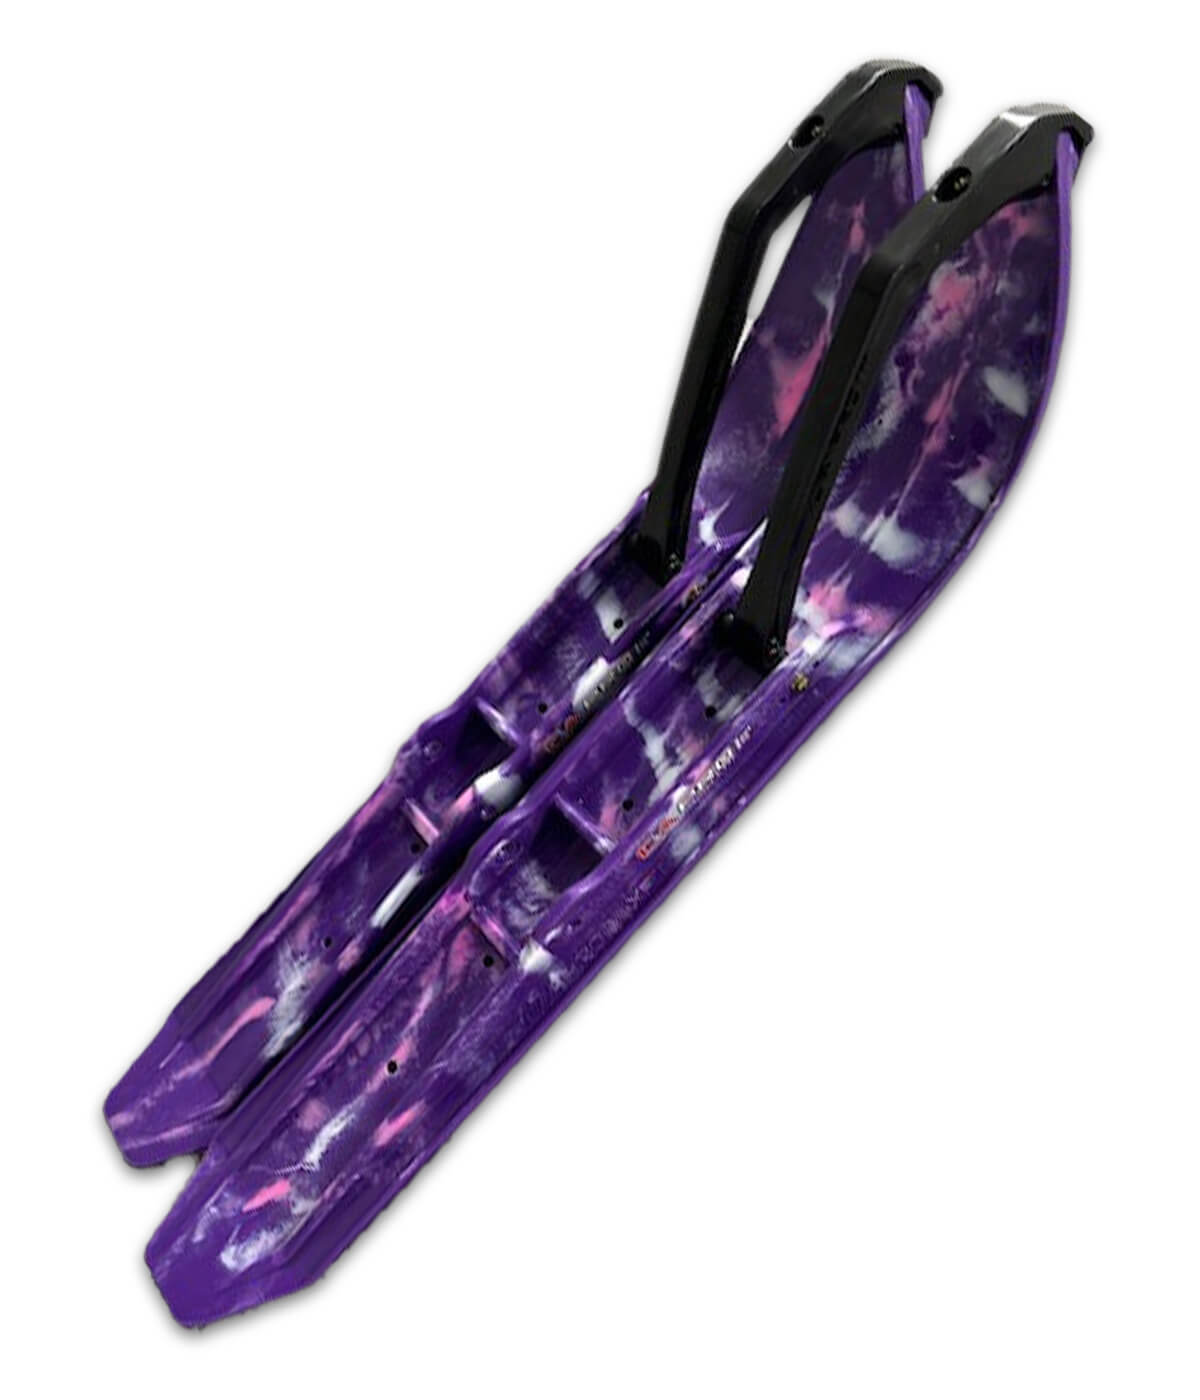 Custom purple XPT skis with white and purple accents and black handles